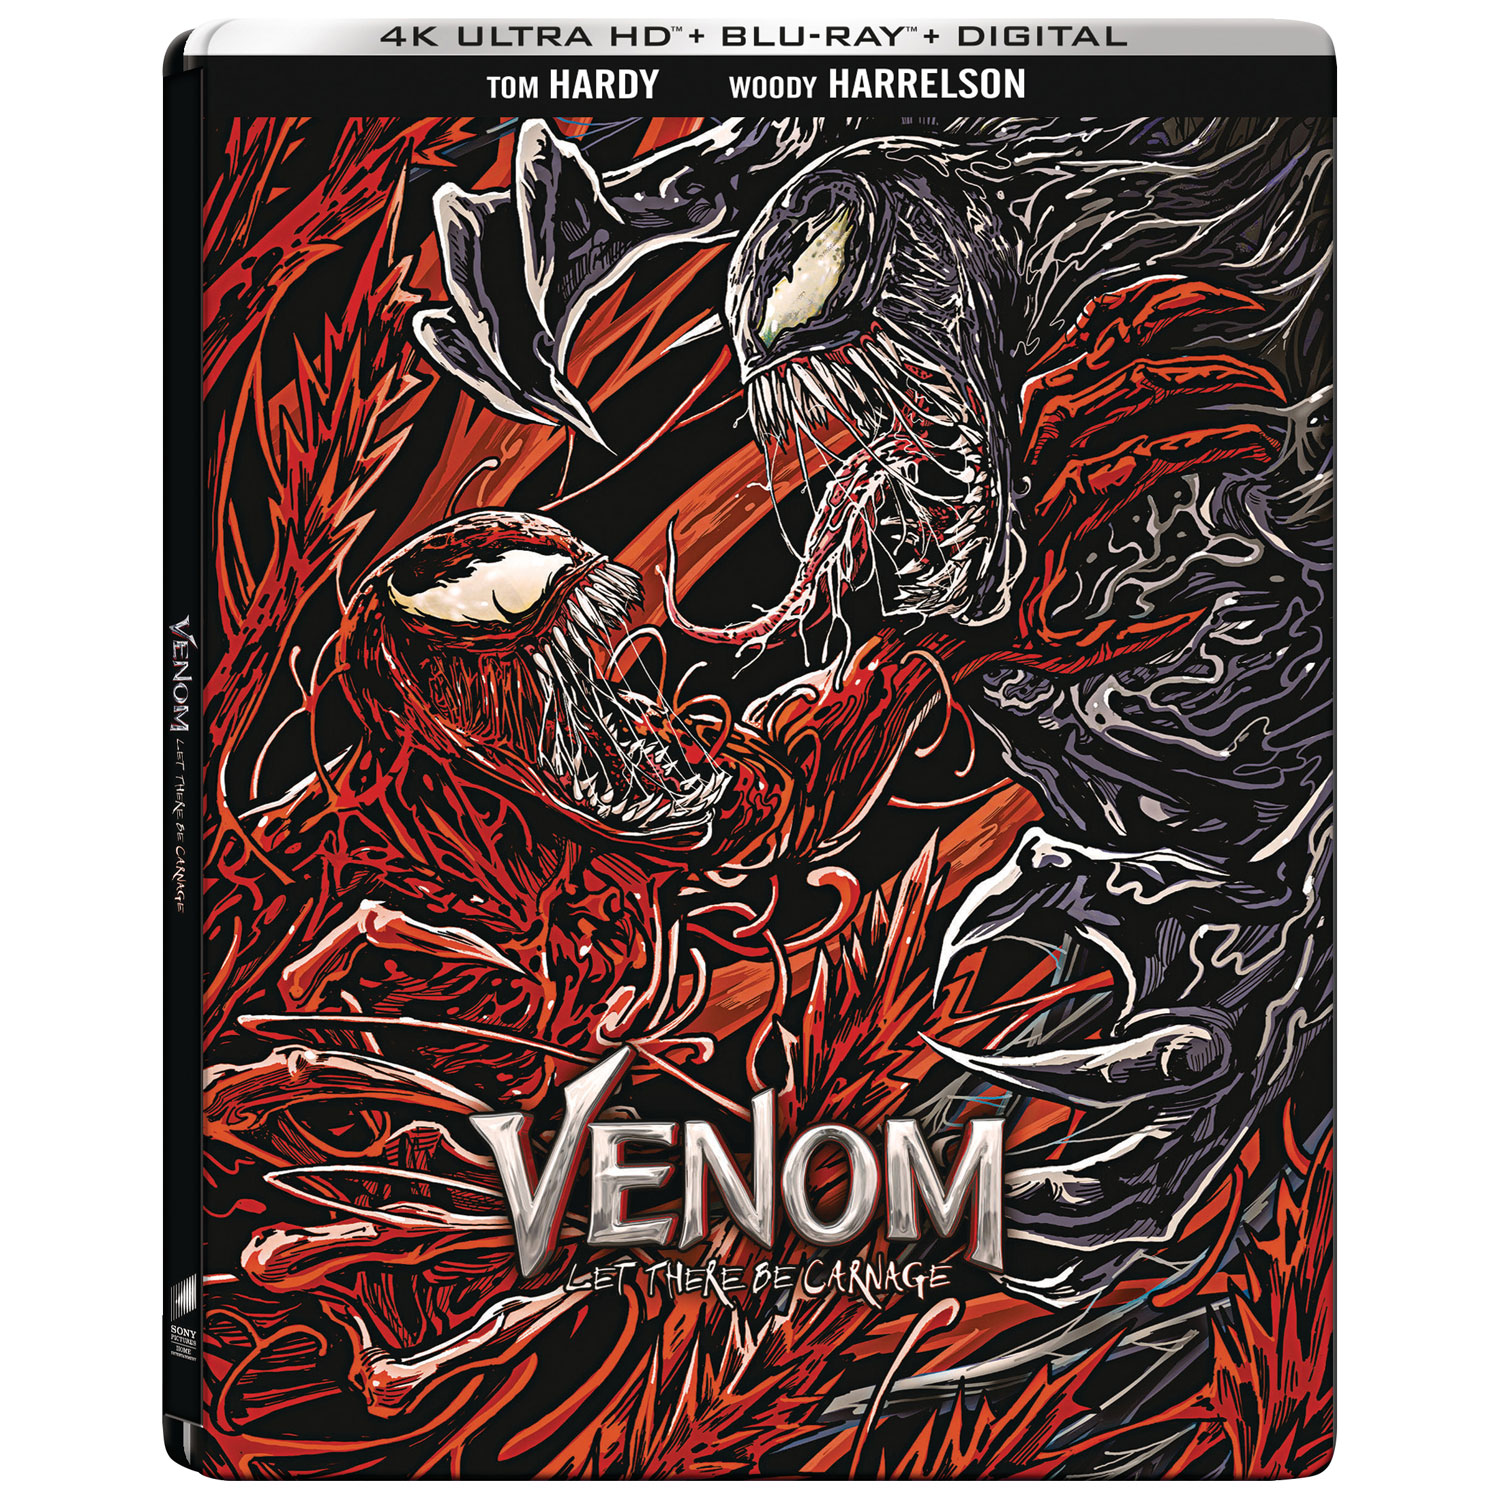 Venom: Let There Be Carnage (Steelbook) (4K Ultra HD) (Blu-ray Combo)